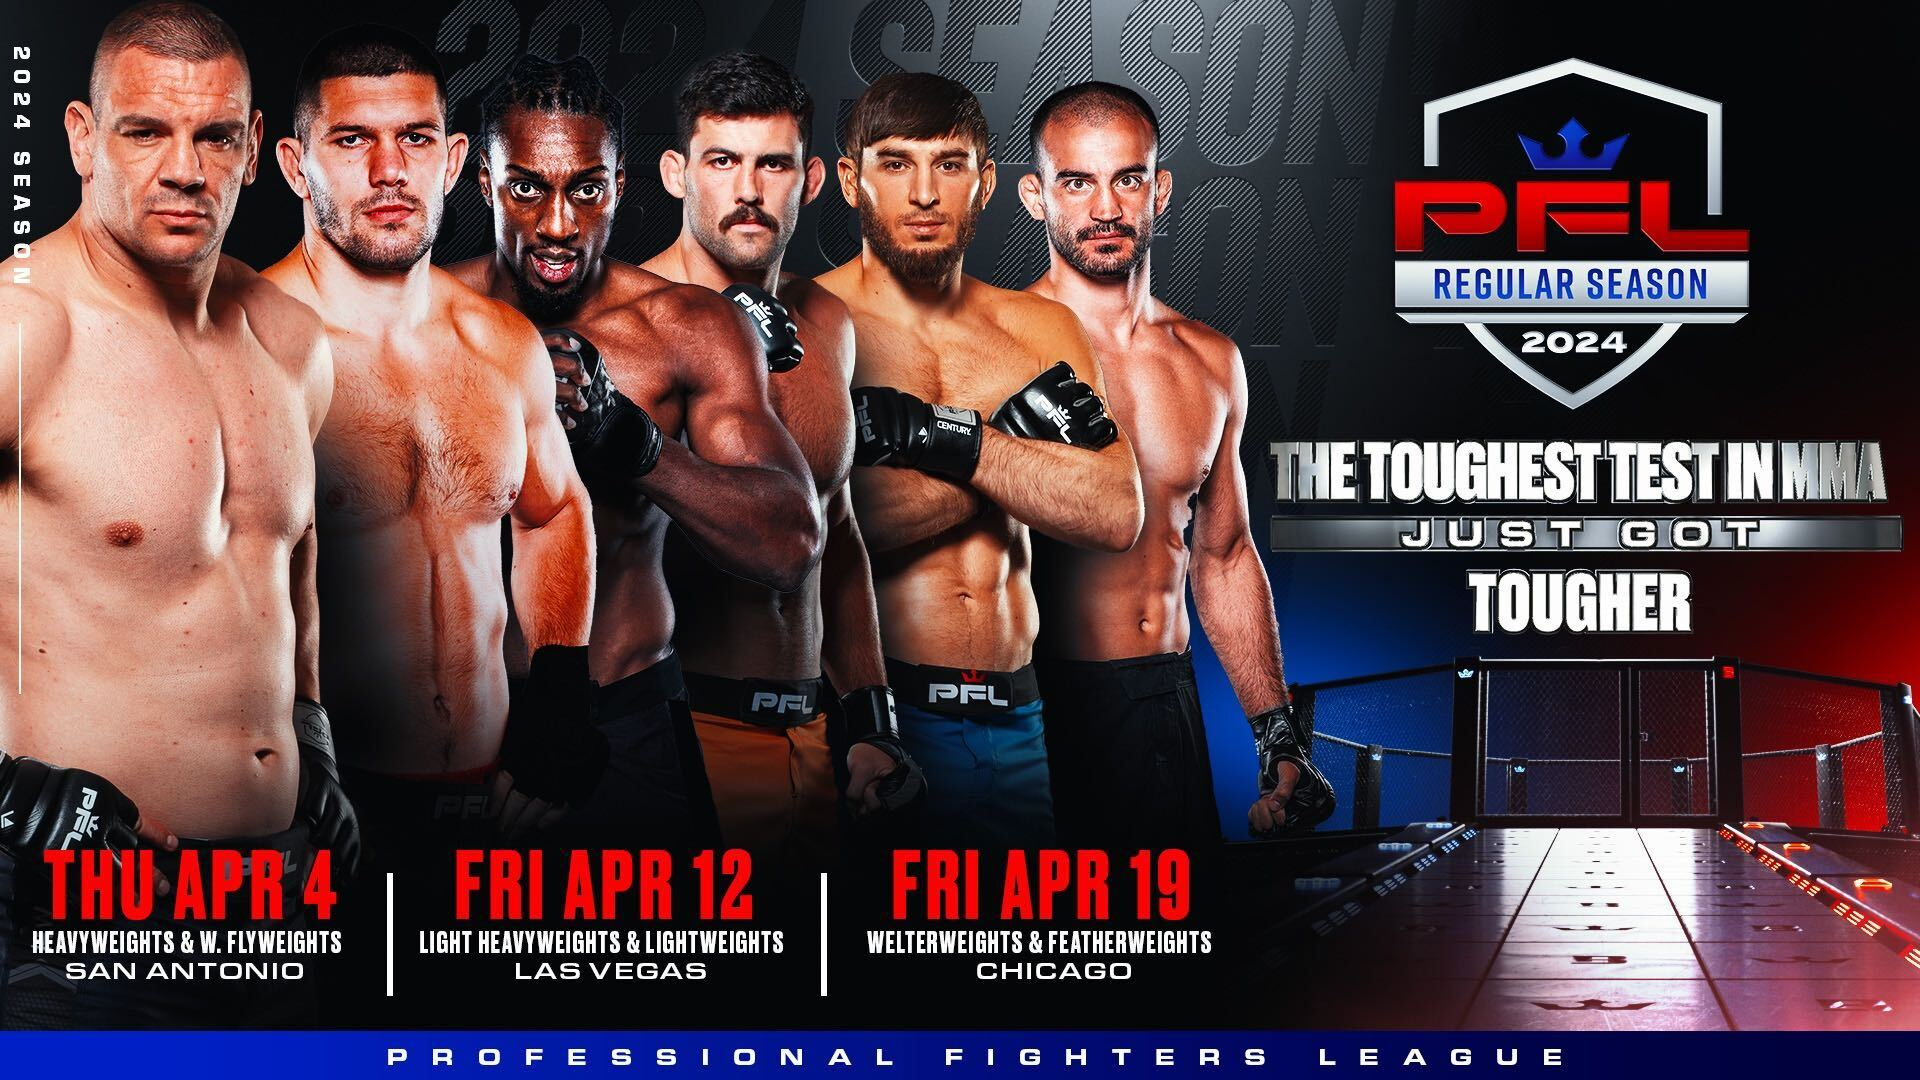 PFL ANNOUNCES FULL CARDS FOR FIRST THREE REGULAR SEASON EVENTS ON APRIL